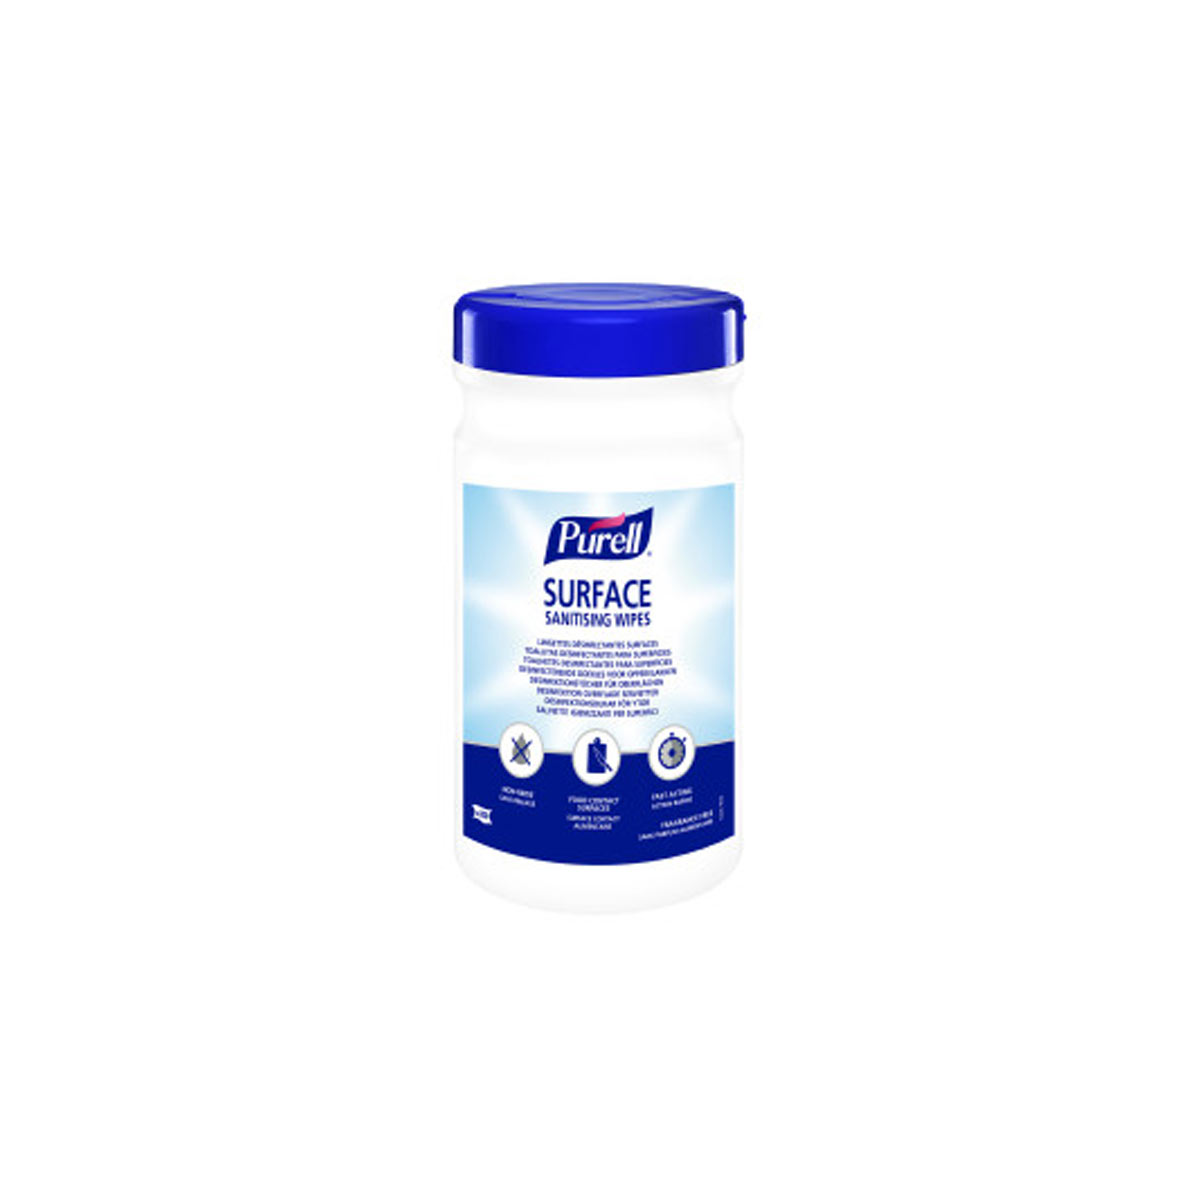 PURELL® Surface Sanitising Wipes